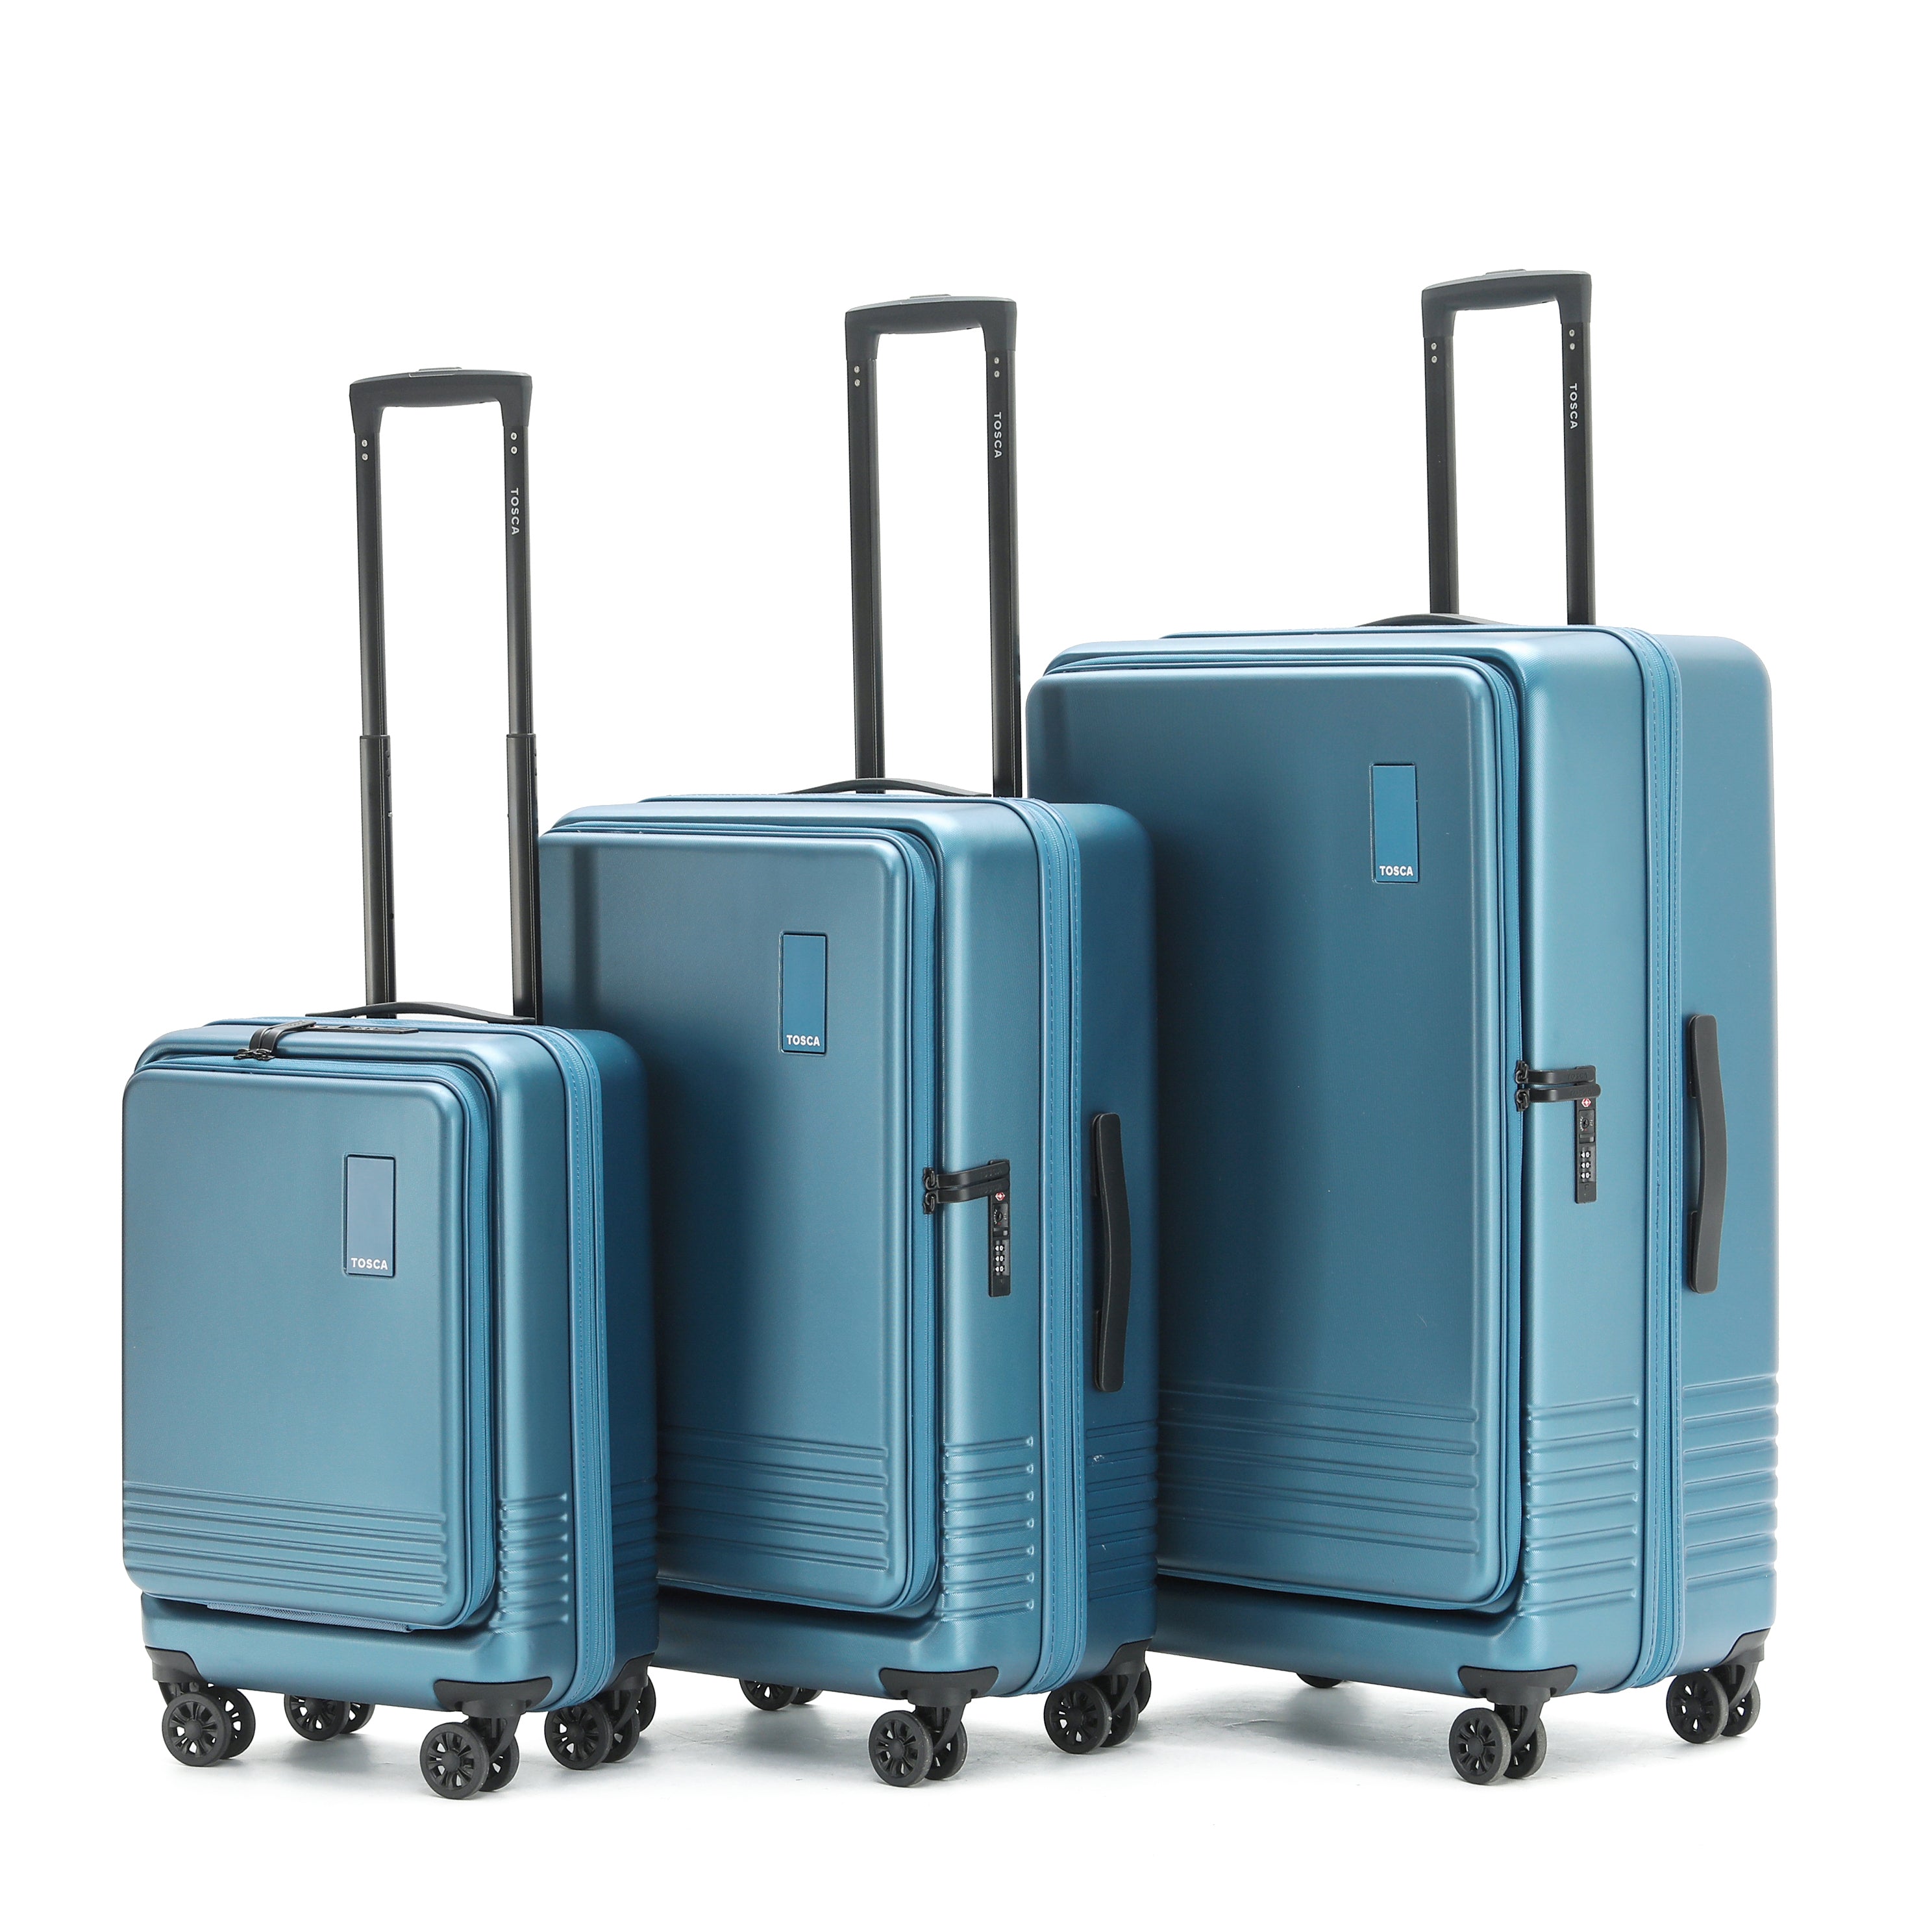 Tosca - TCA644 Horizon Front lid opening Set of 3 suitcases - Blue-2